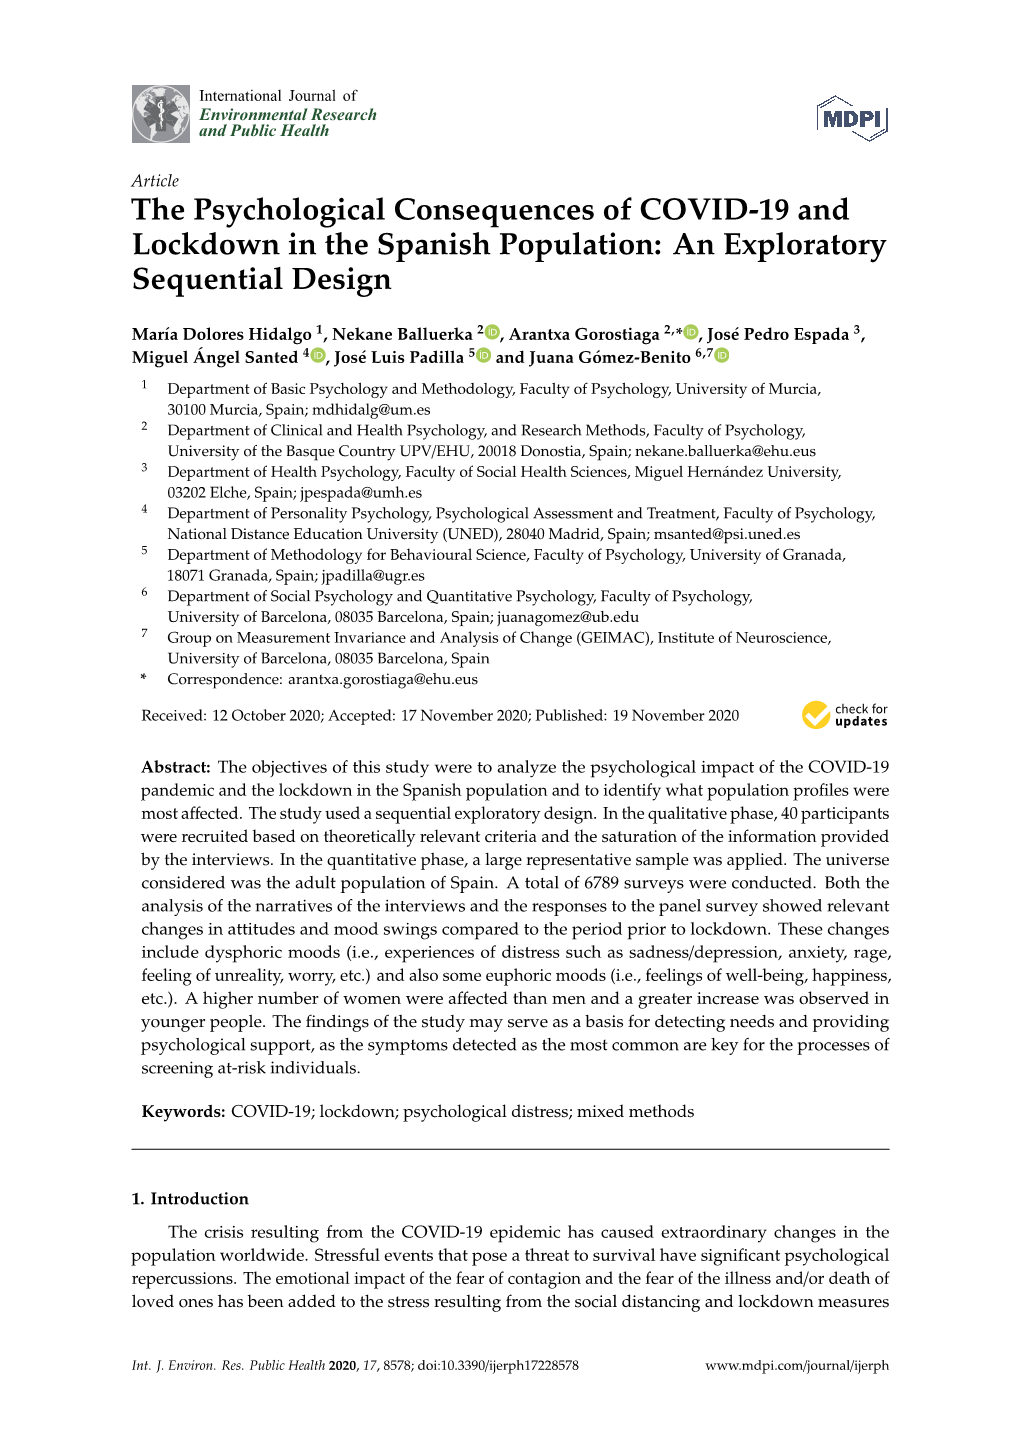 The Psychological Consequences of COVID-19 and Lockdown in the Spanish Population: an Exploratory Sequential Design